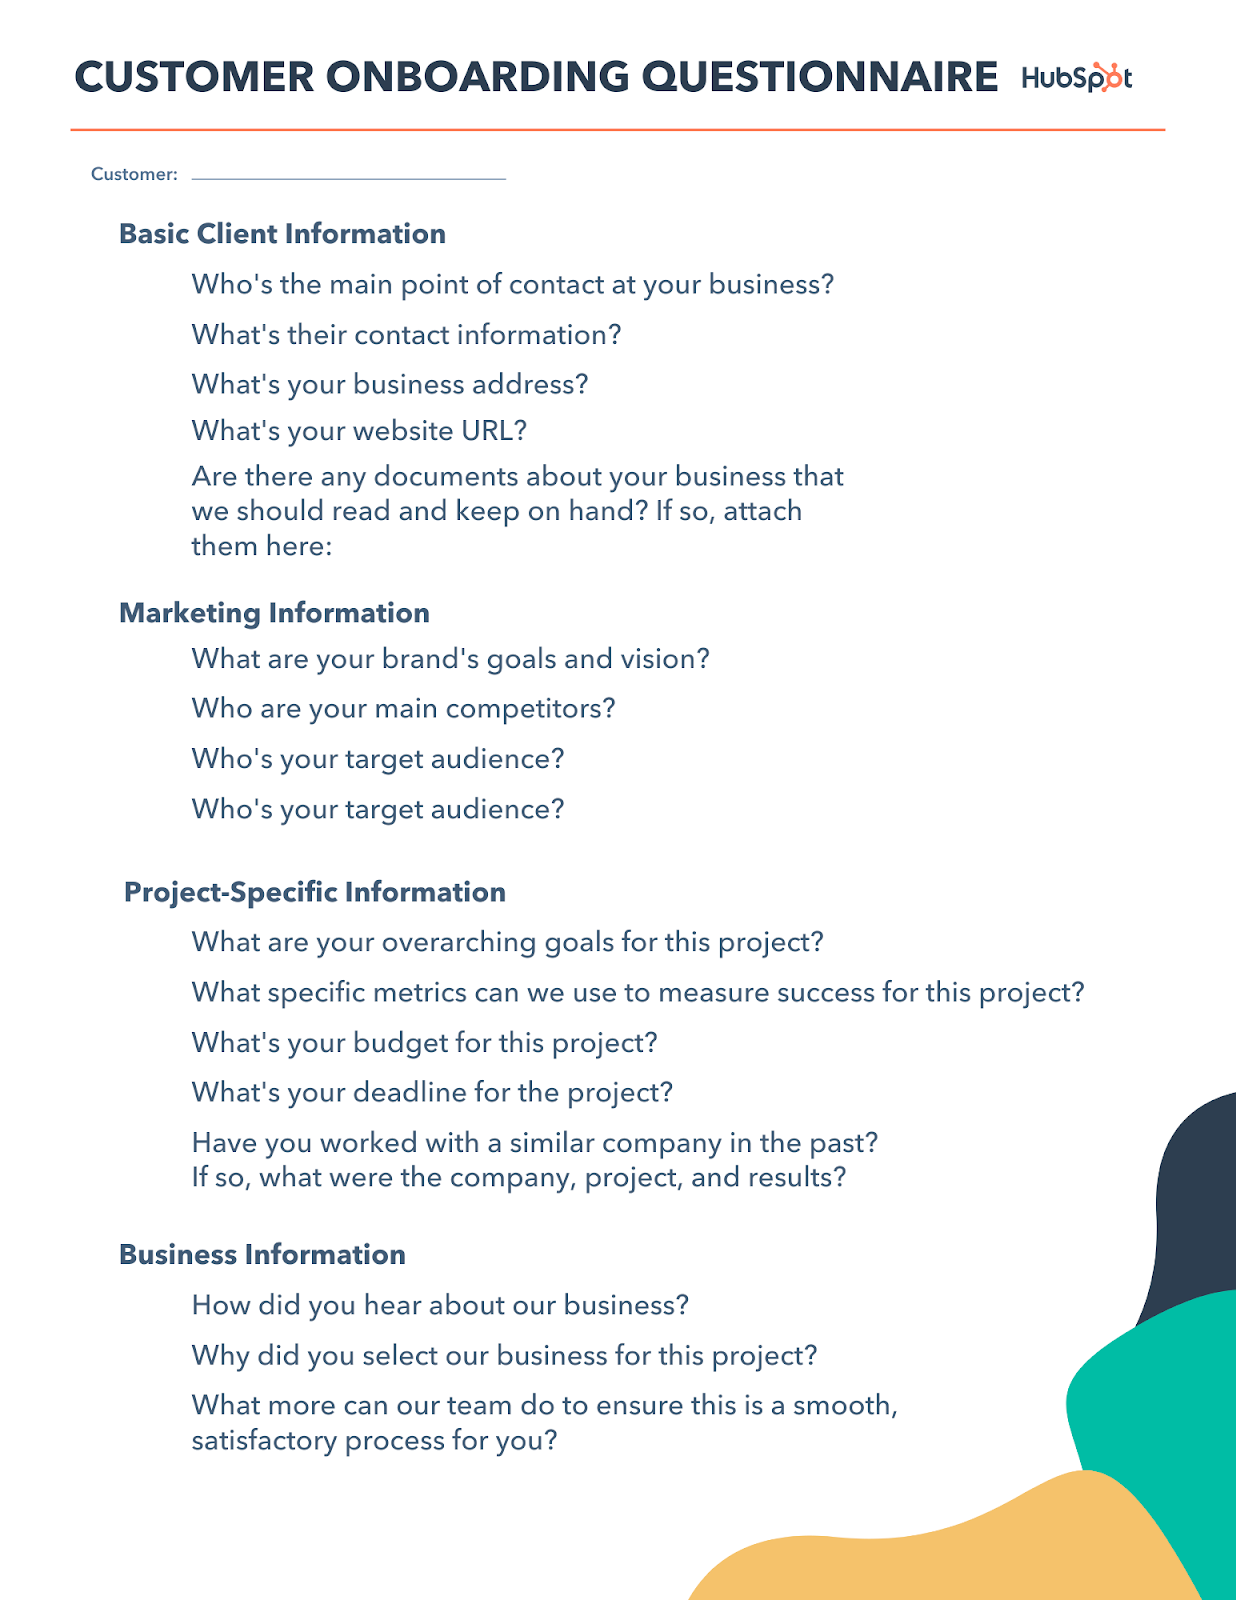 The New Client Onboarding Questionnaire You'll Want to Send to Customers